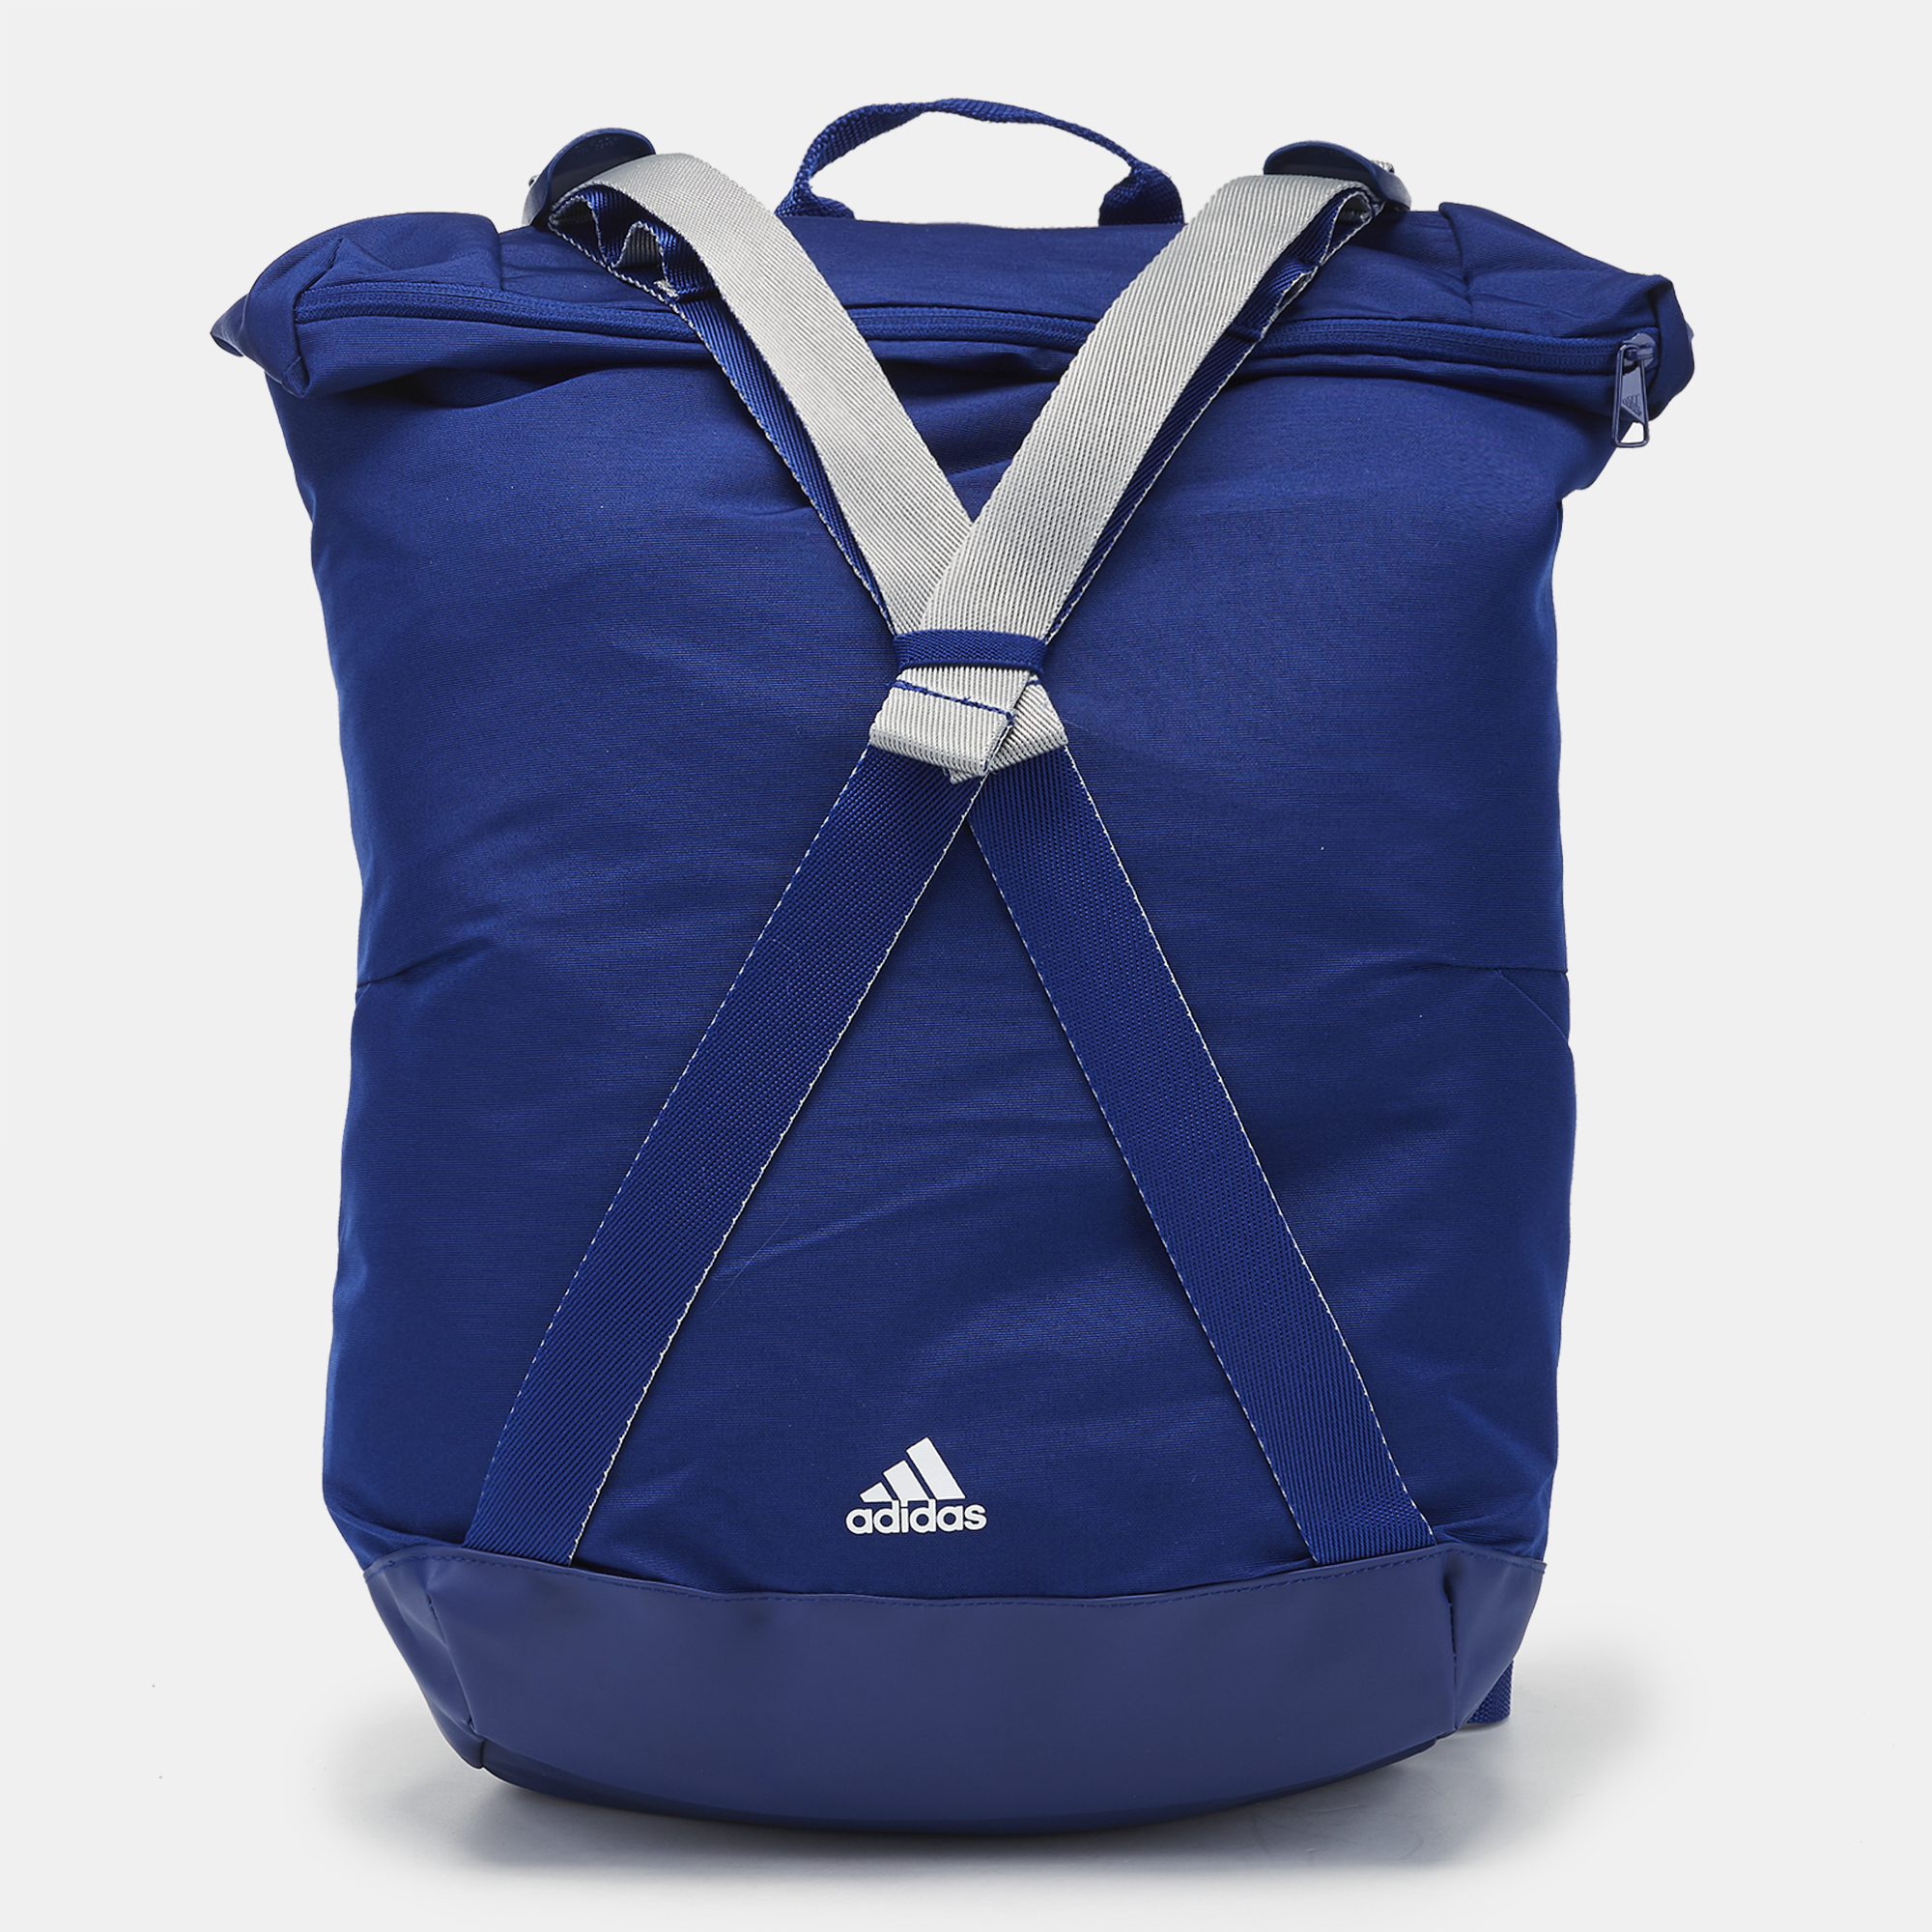 zne adidas backpack factory outlet 